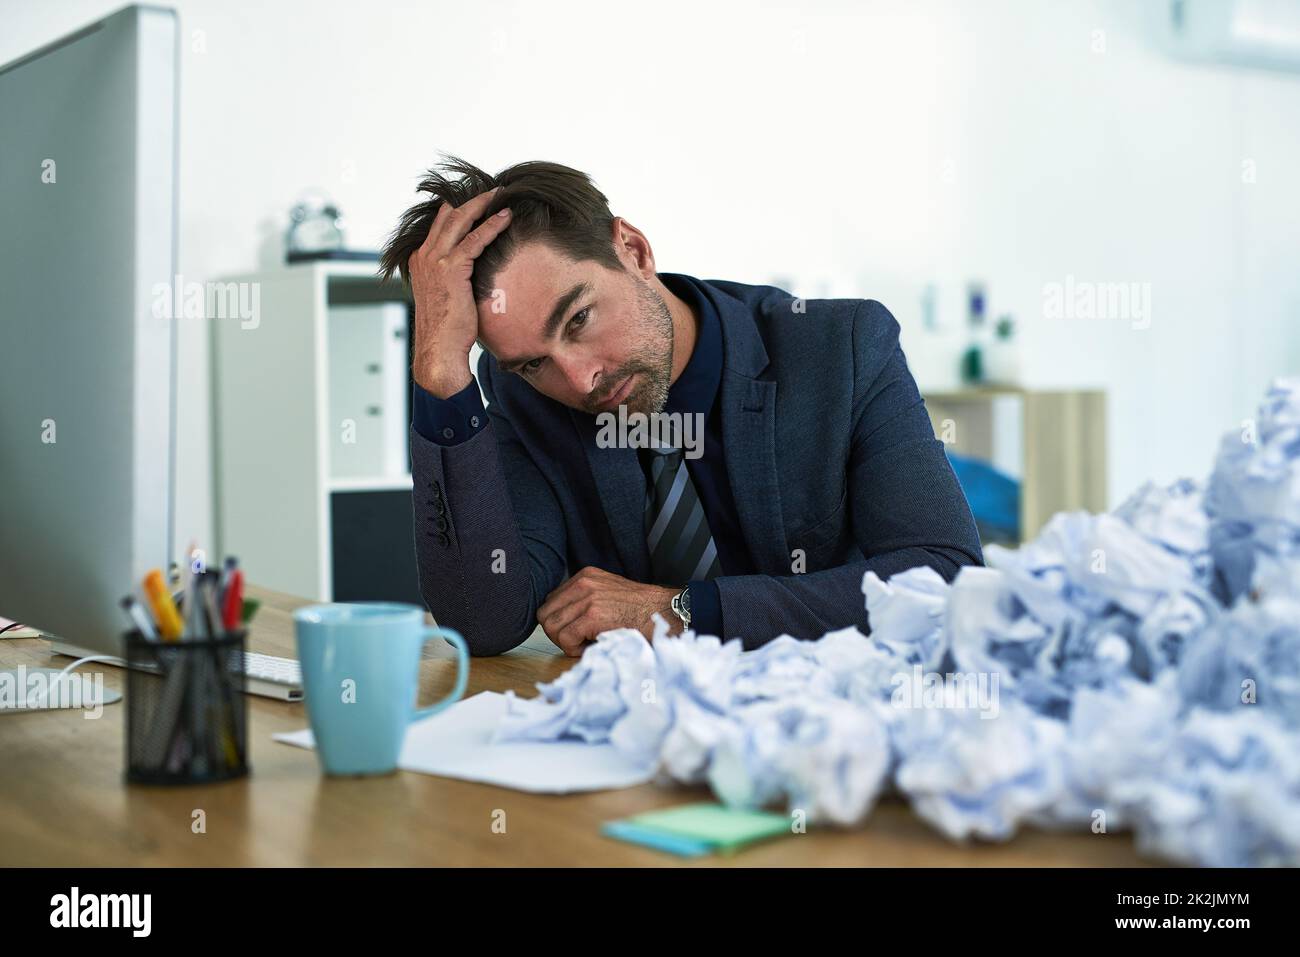 Work just keeps piling up. Shot of a stressed out businessman sitting at his desk overwhelmed by paperwork. Stock Photo